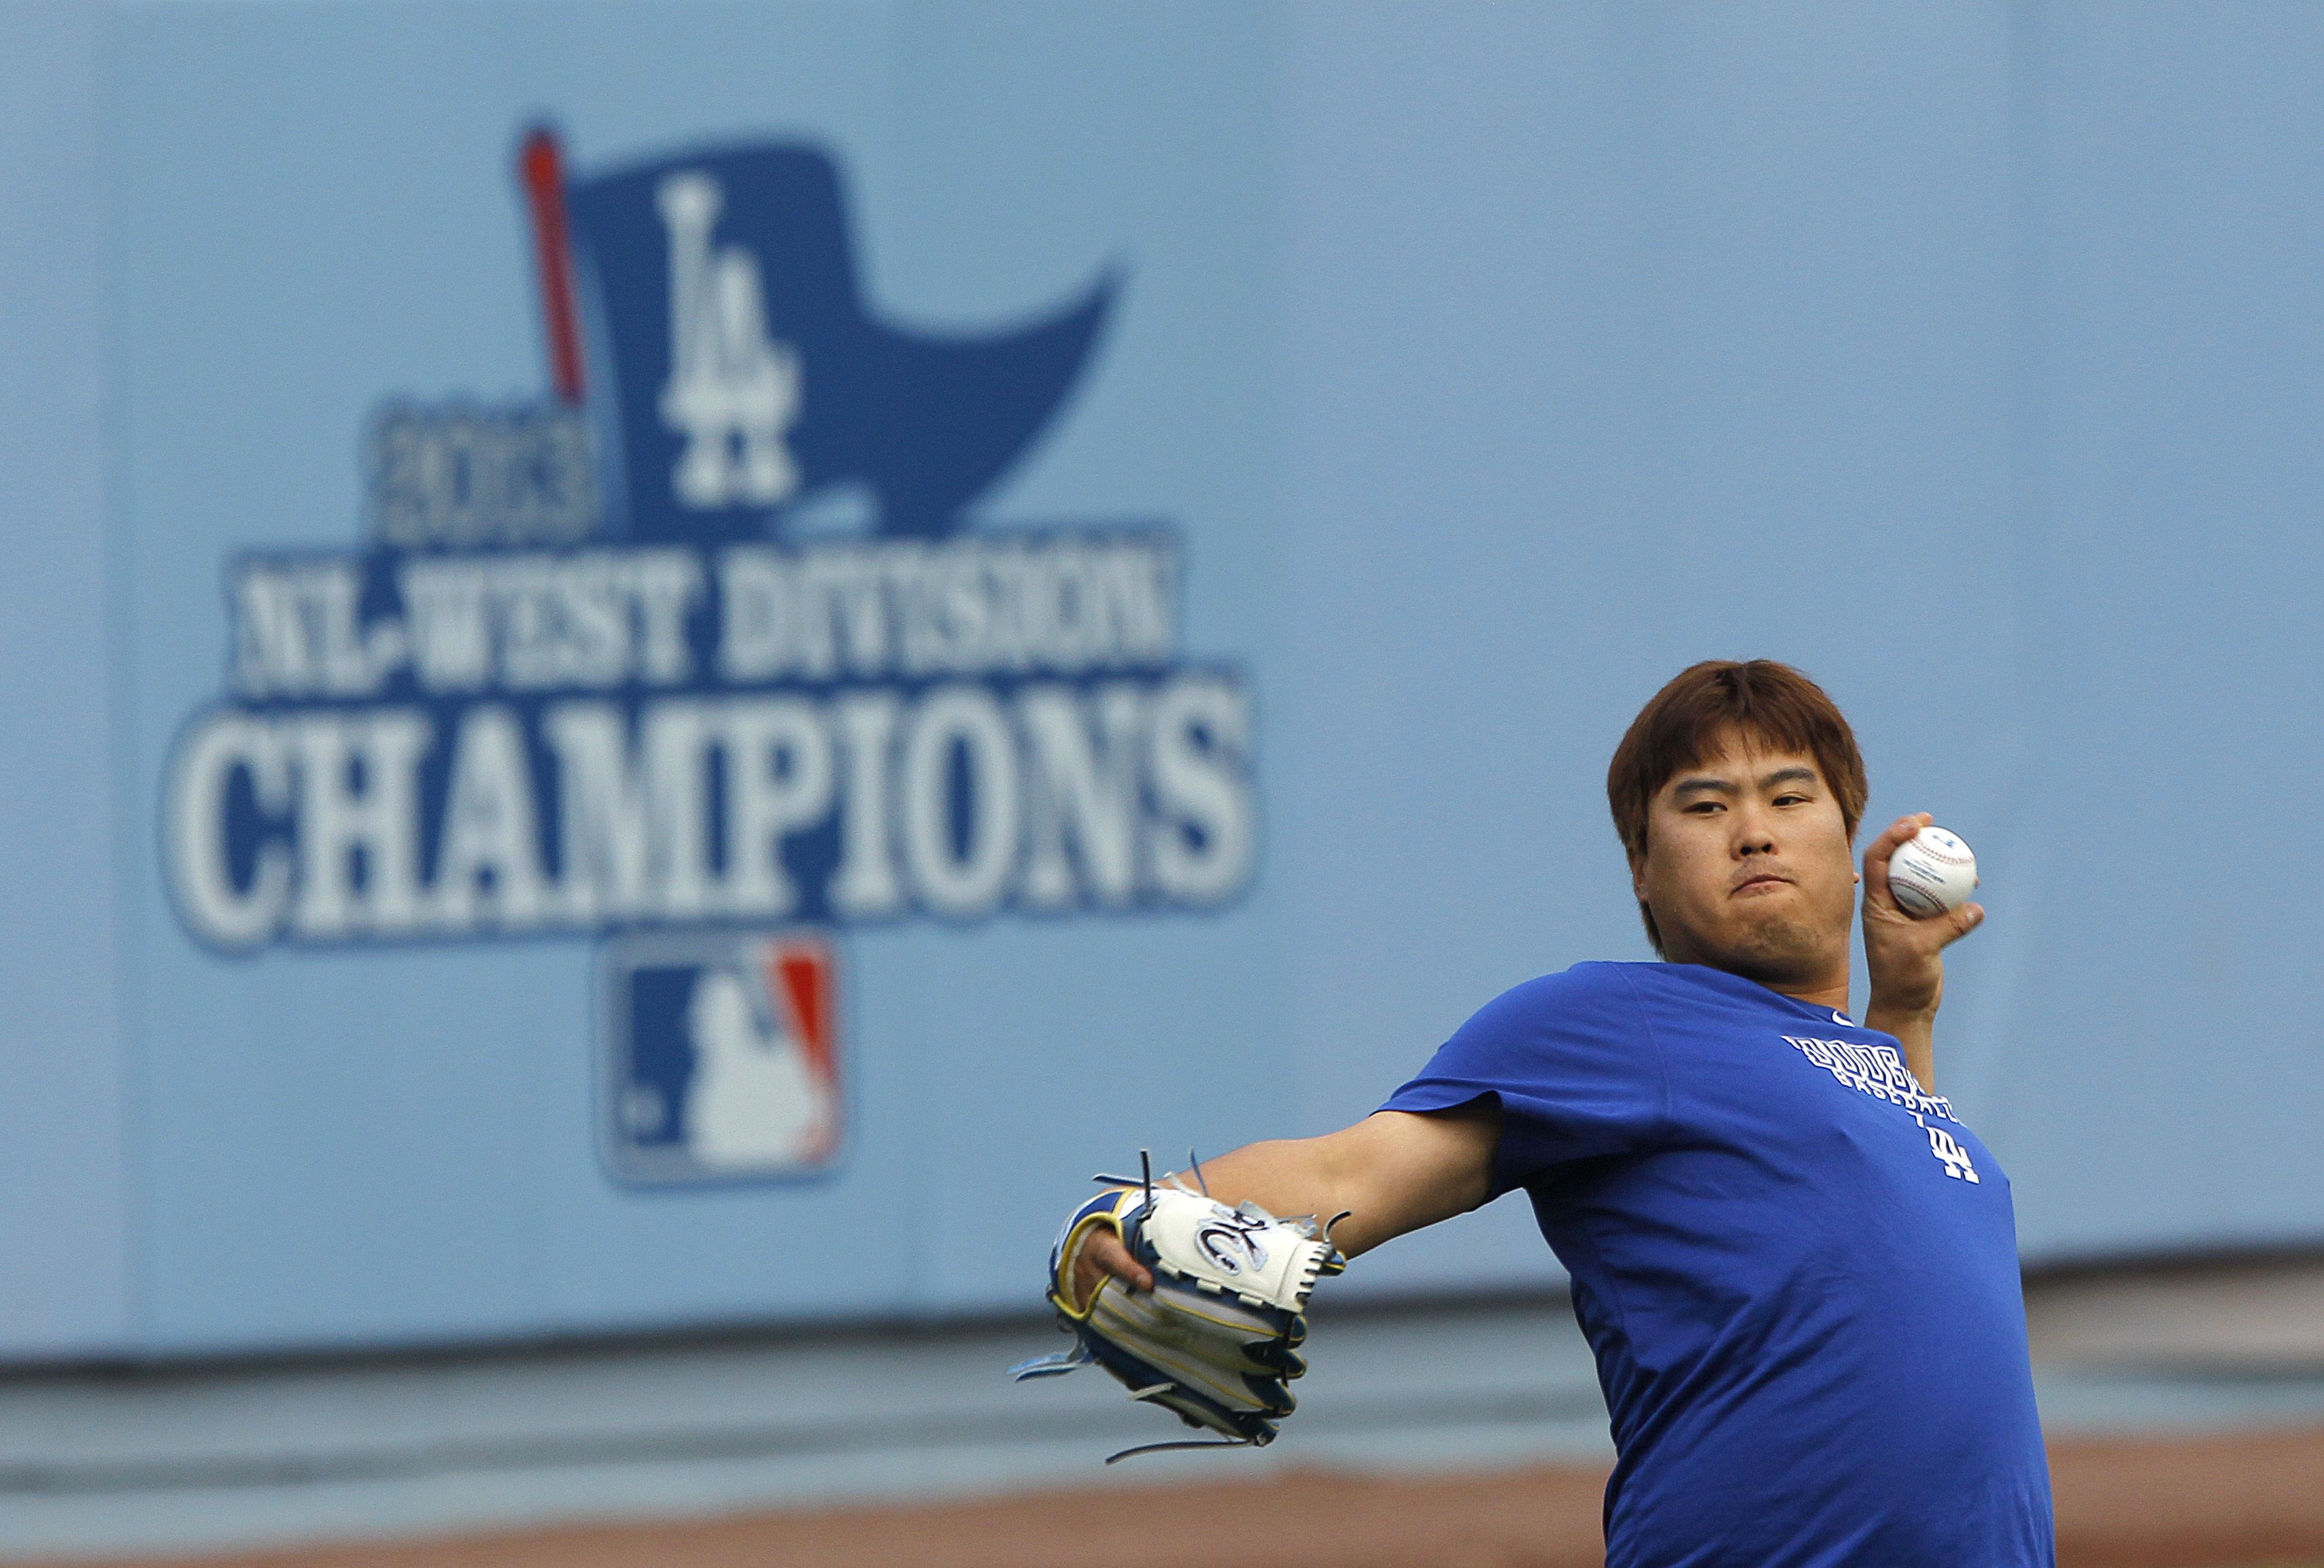 Los Angeles Dodgers starting pitcher Hyun-Jin Ryu, of South Korea, throws the ball during practice in preparation for Monday's Game 3 of the National League baseball championship series against the St. Louis Cardinals, on Sunday, Oct. 13, 2013, in Los Angeles. (AP Photo/Jae C. Hong)